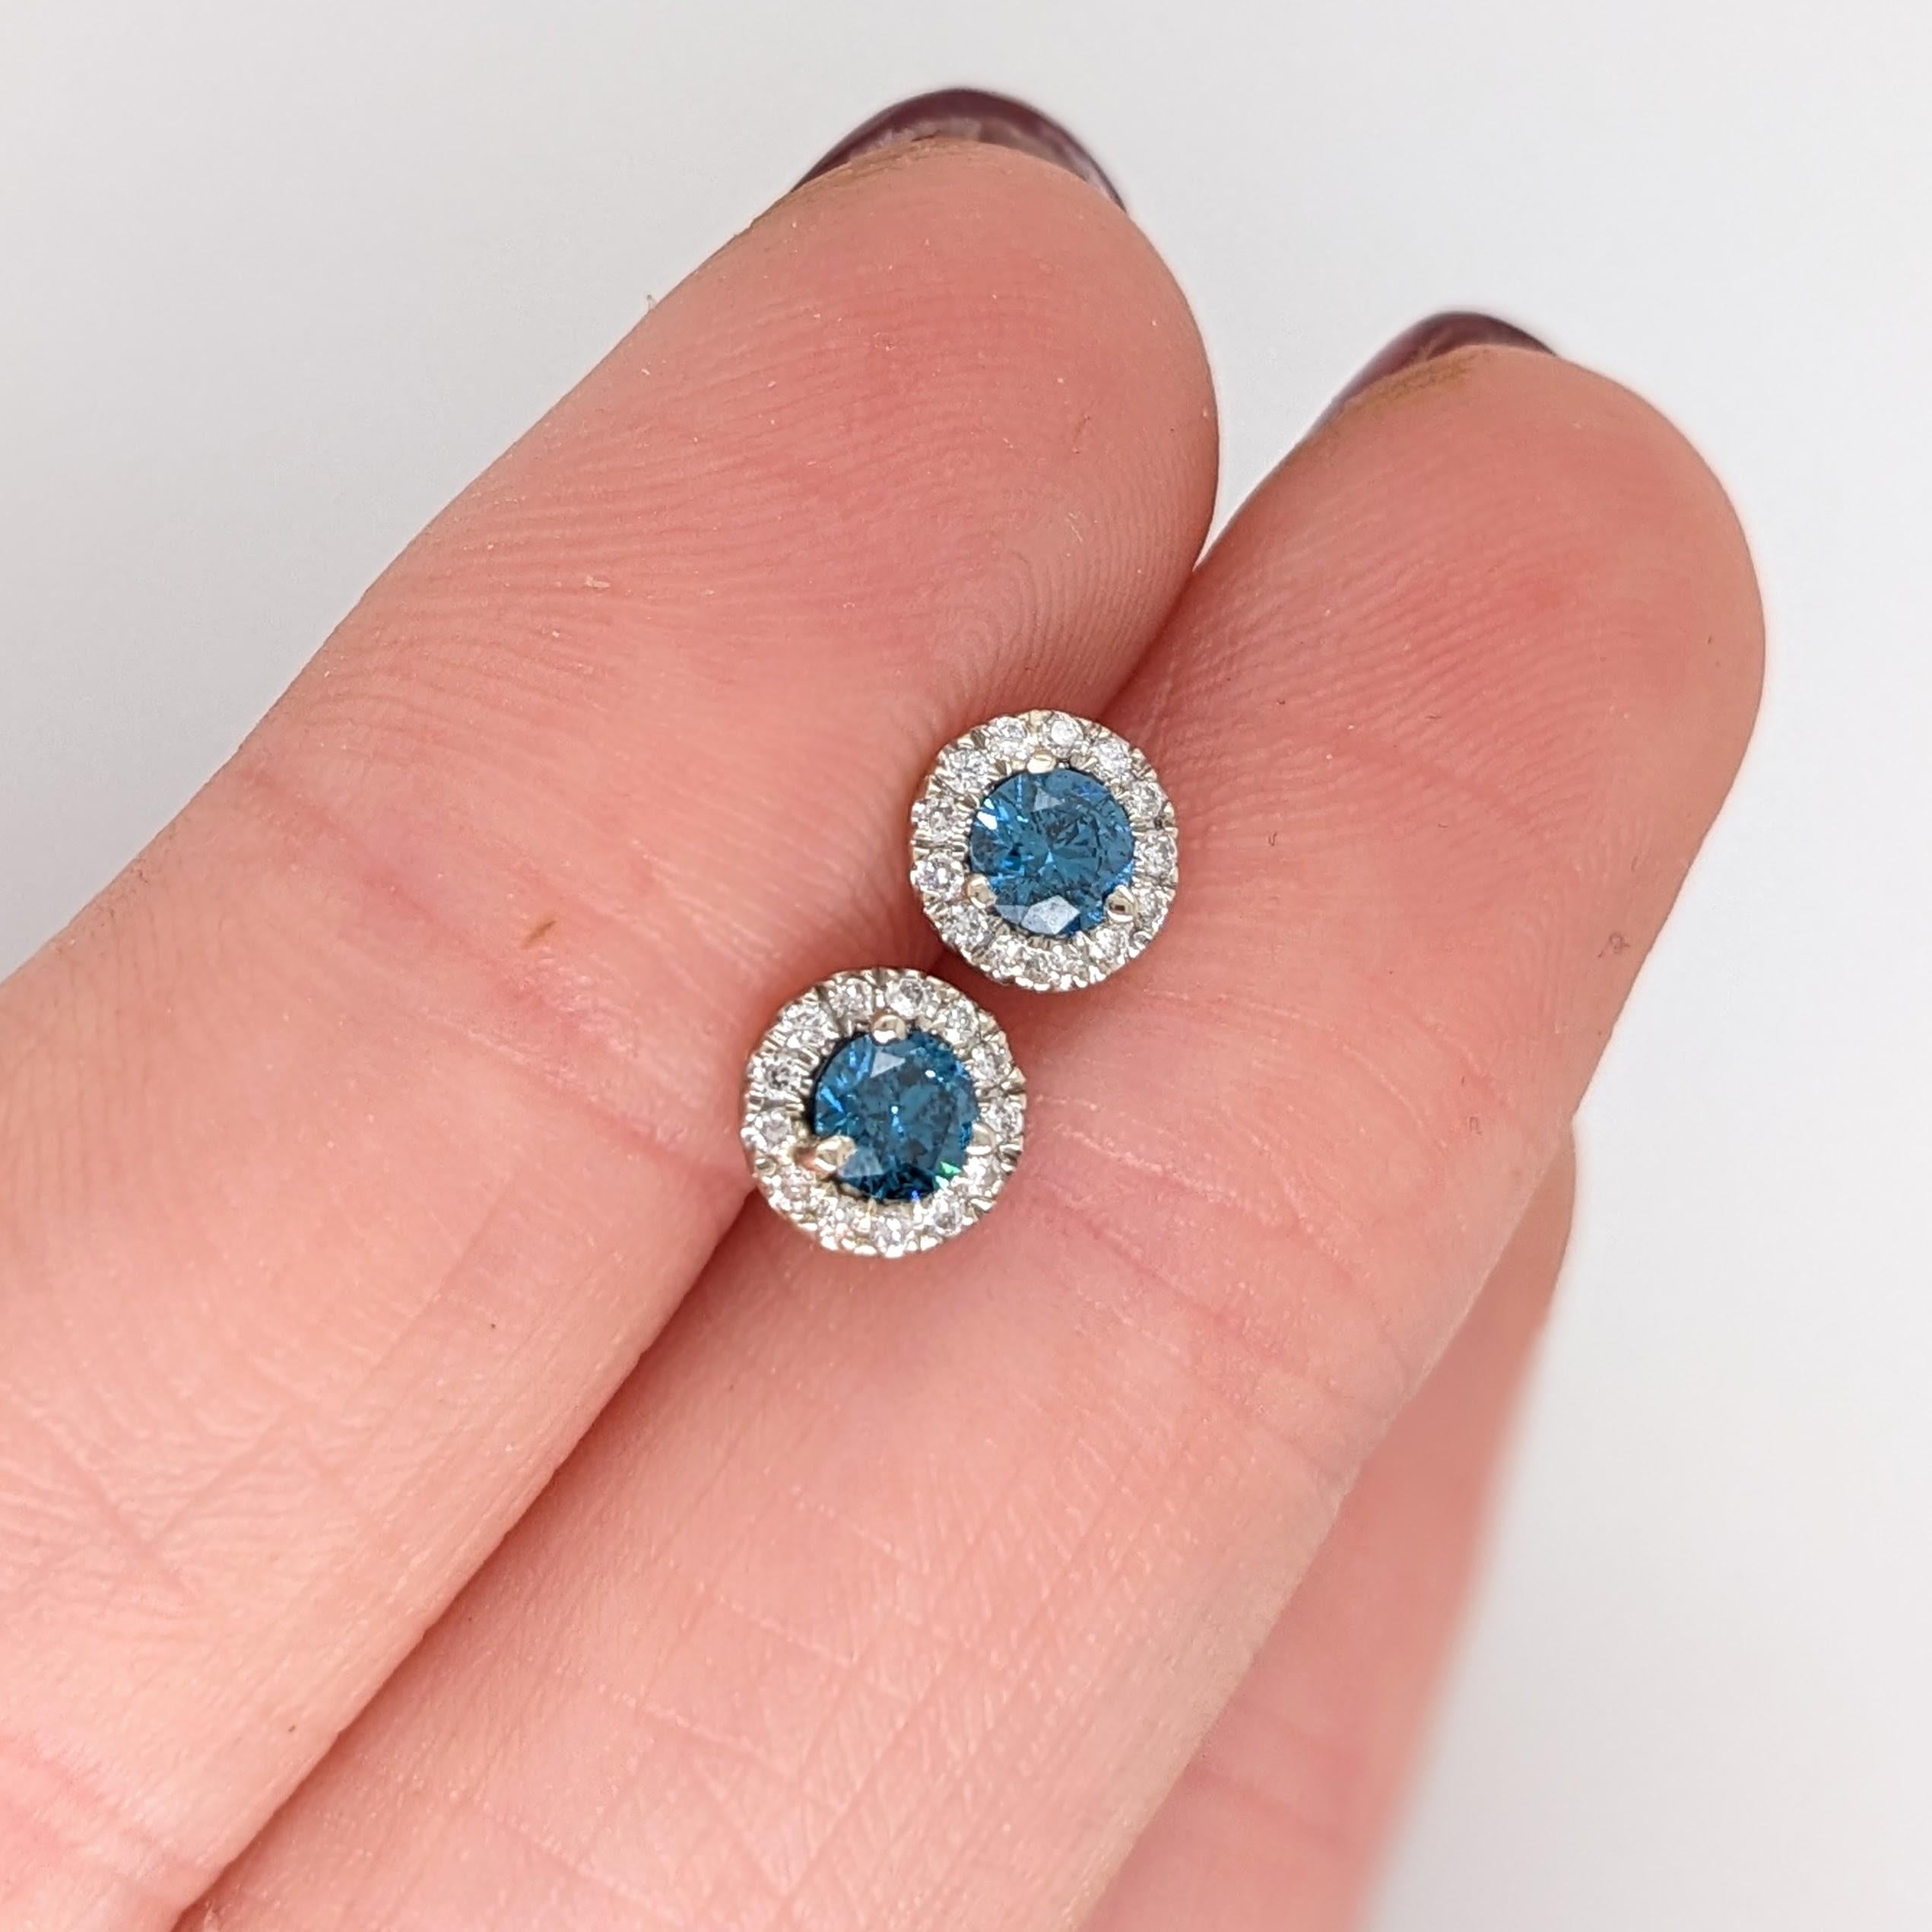 Blue Diamond Earrings w Natural Diamonds in Solid 14K White Gold Round 3.5mm